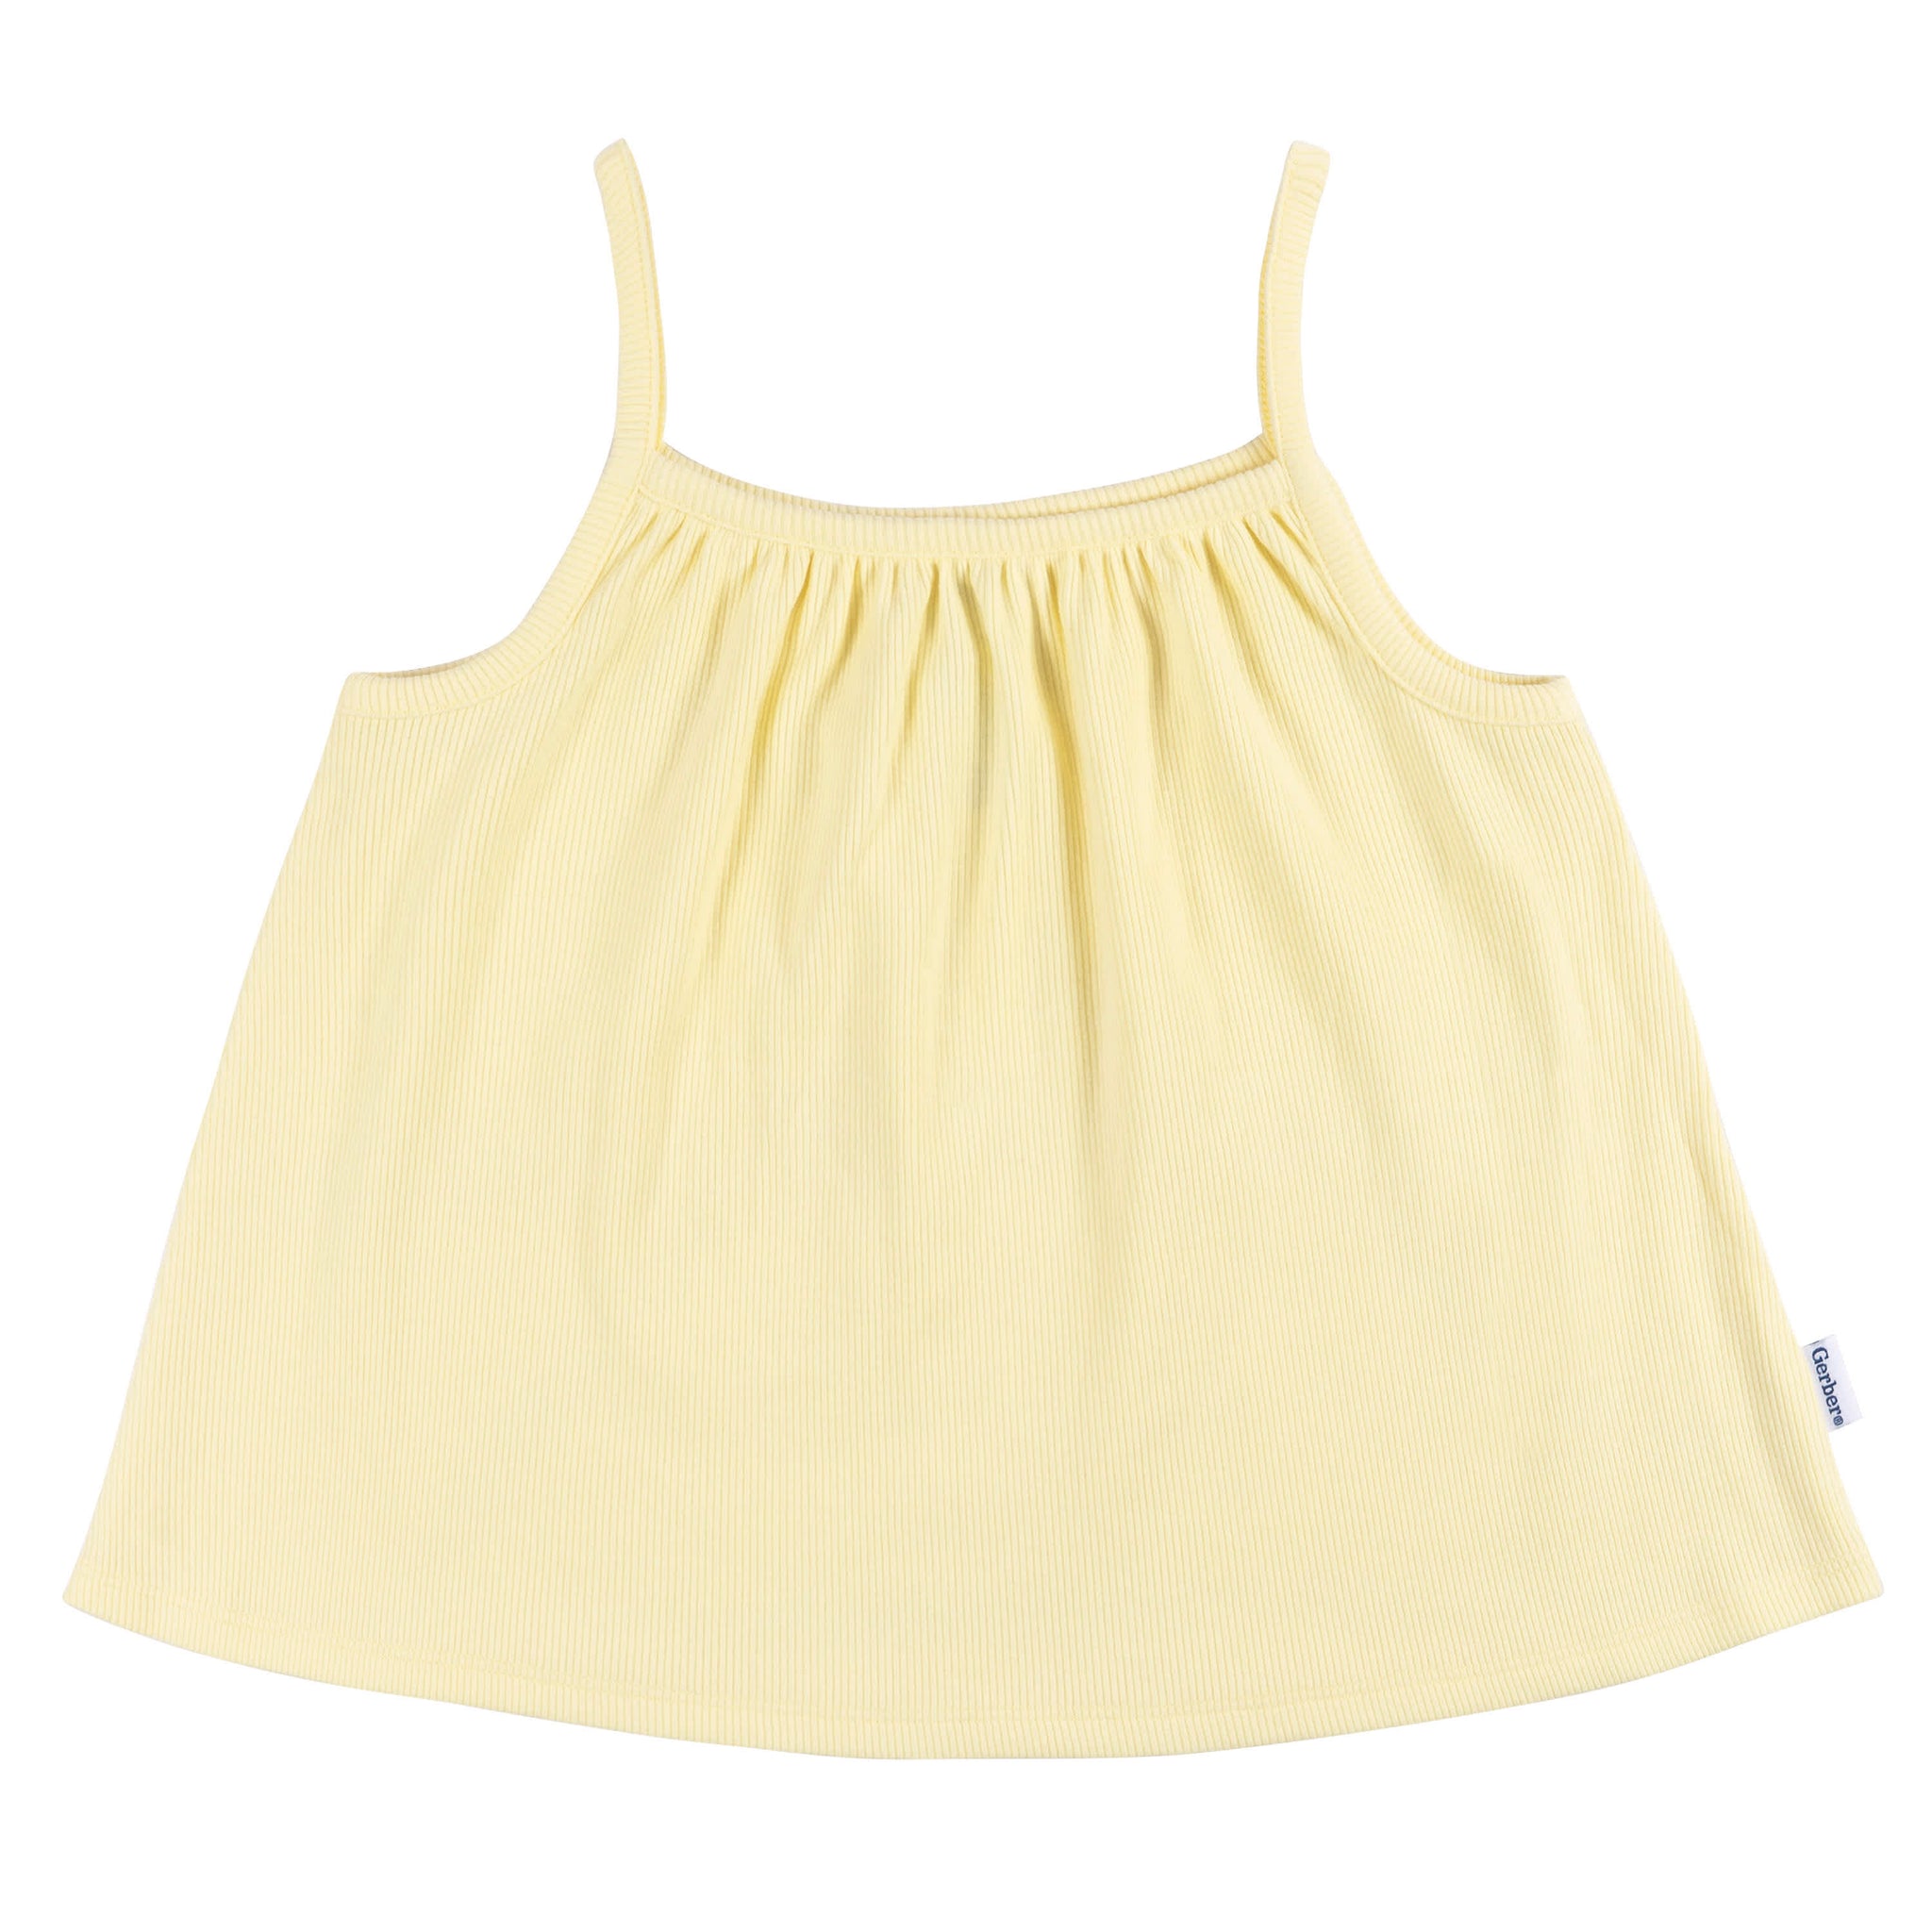 2-Piece Infant and Toddler Girls Yellow Tank Top & Shorts Set-Gerber Childrenswear Wholesale